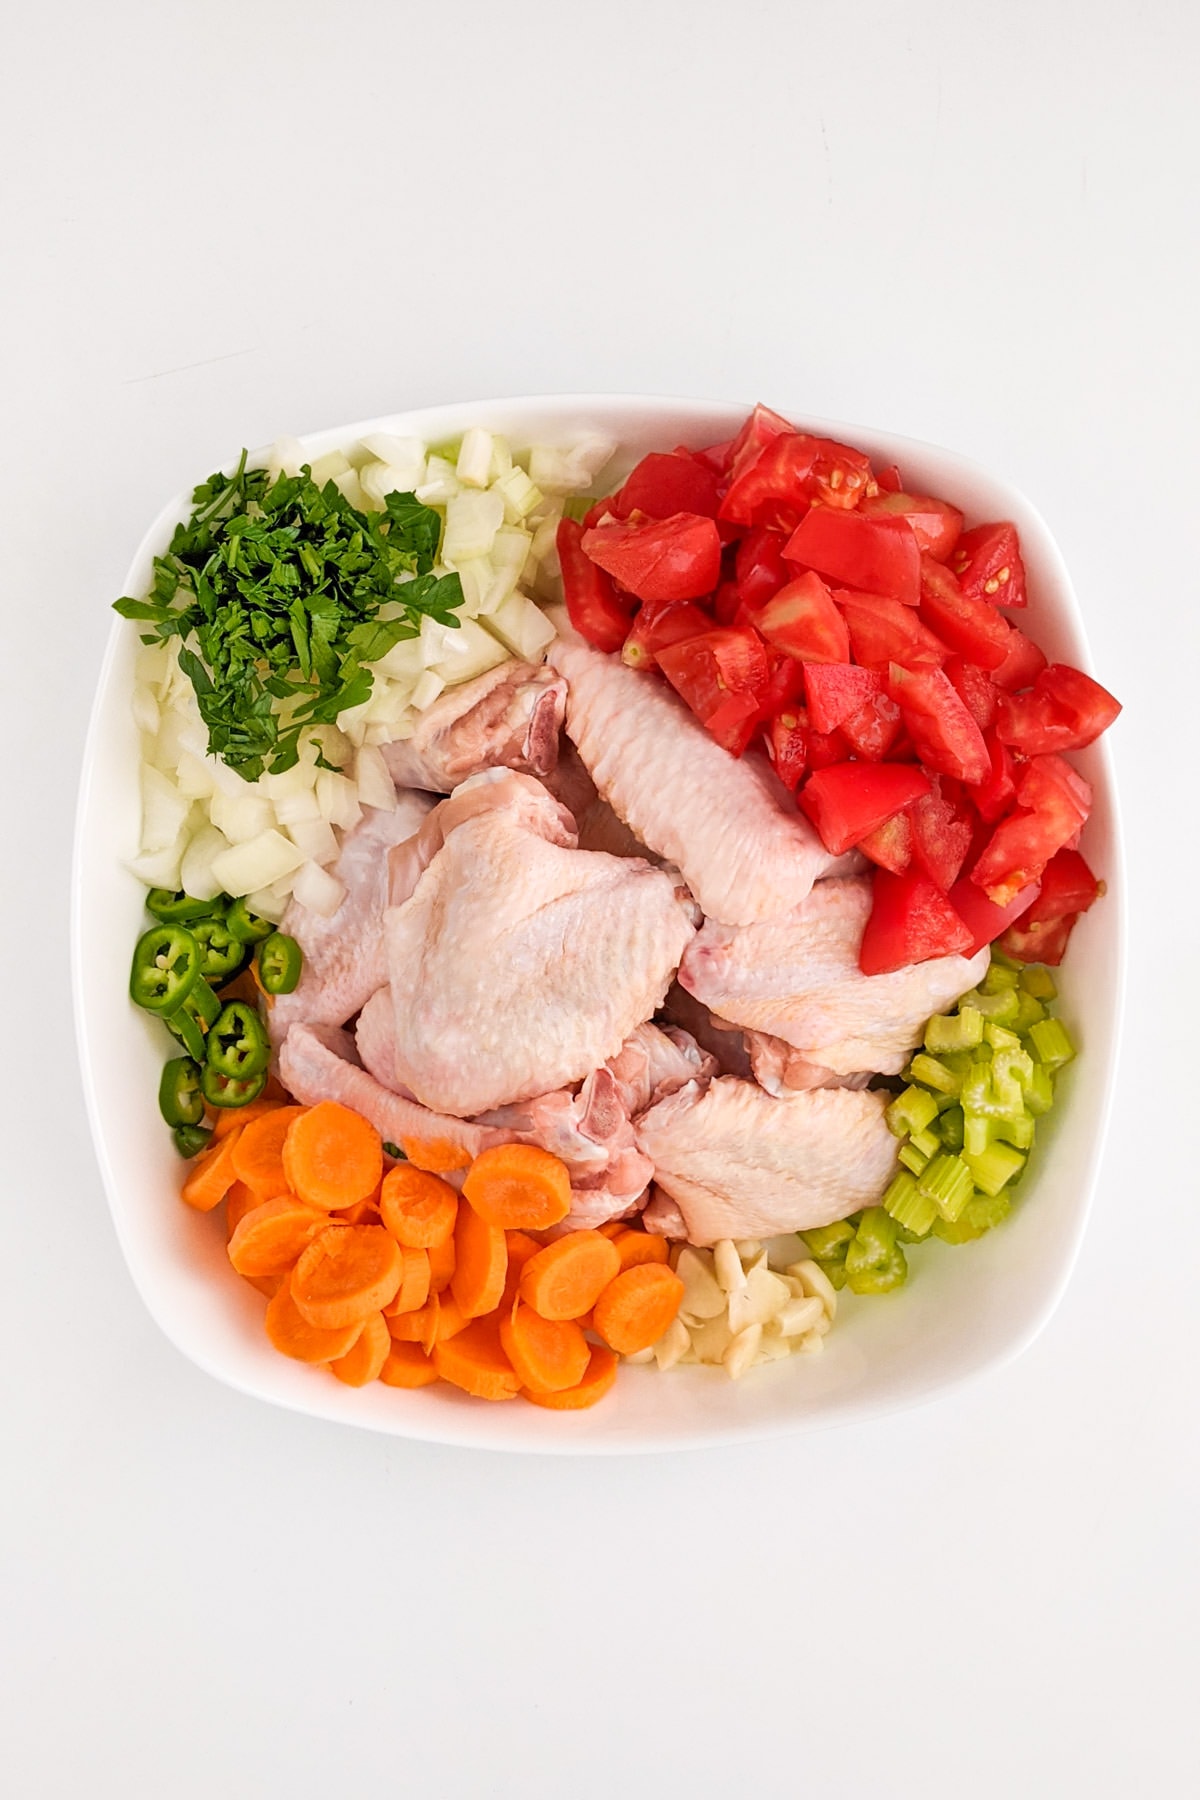 Chicken wings with chopped tomatoes, onions, parsley, carrots and celery in a white plate.